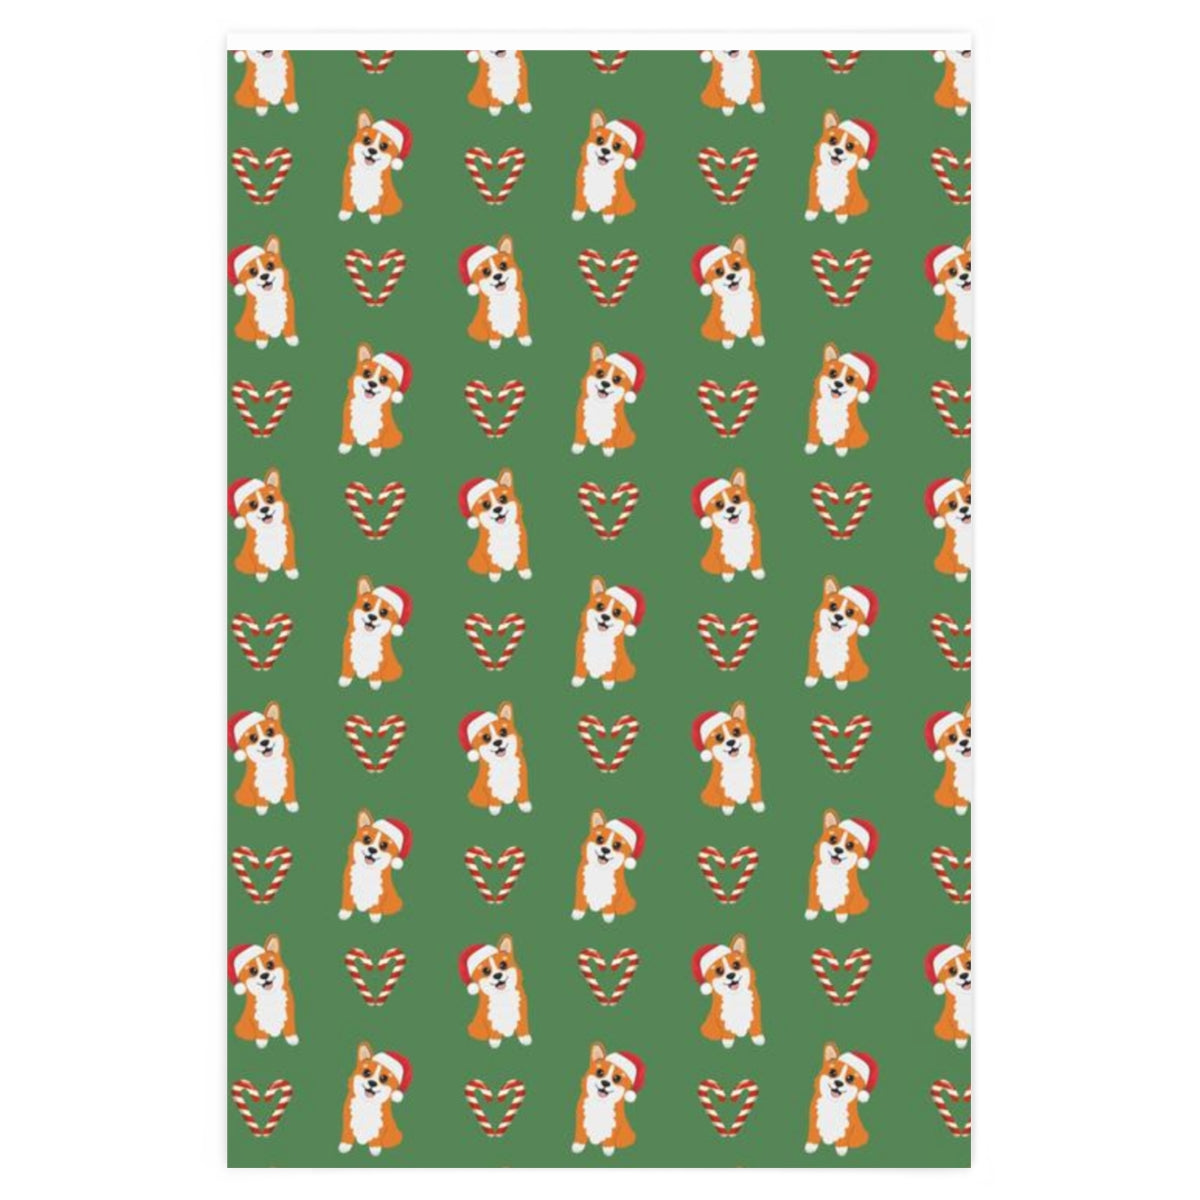 Corgi Christmas Wrapping Paper, Dog Funny Candy Cane Print Art Holiday Gift Wrap Decorative Vintage Wrapper Roll Starcove Fashion